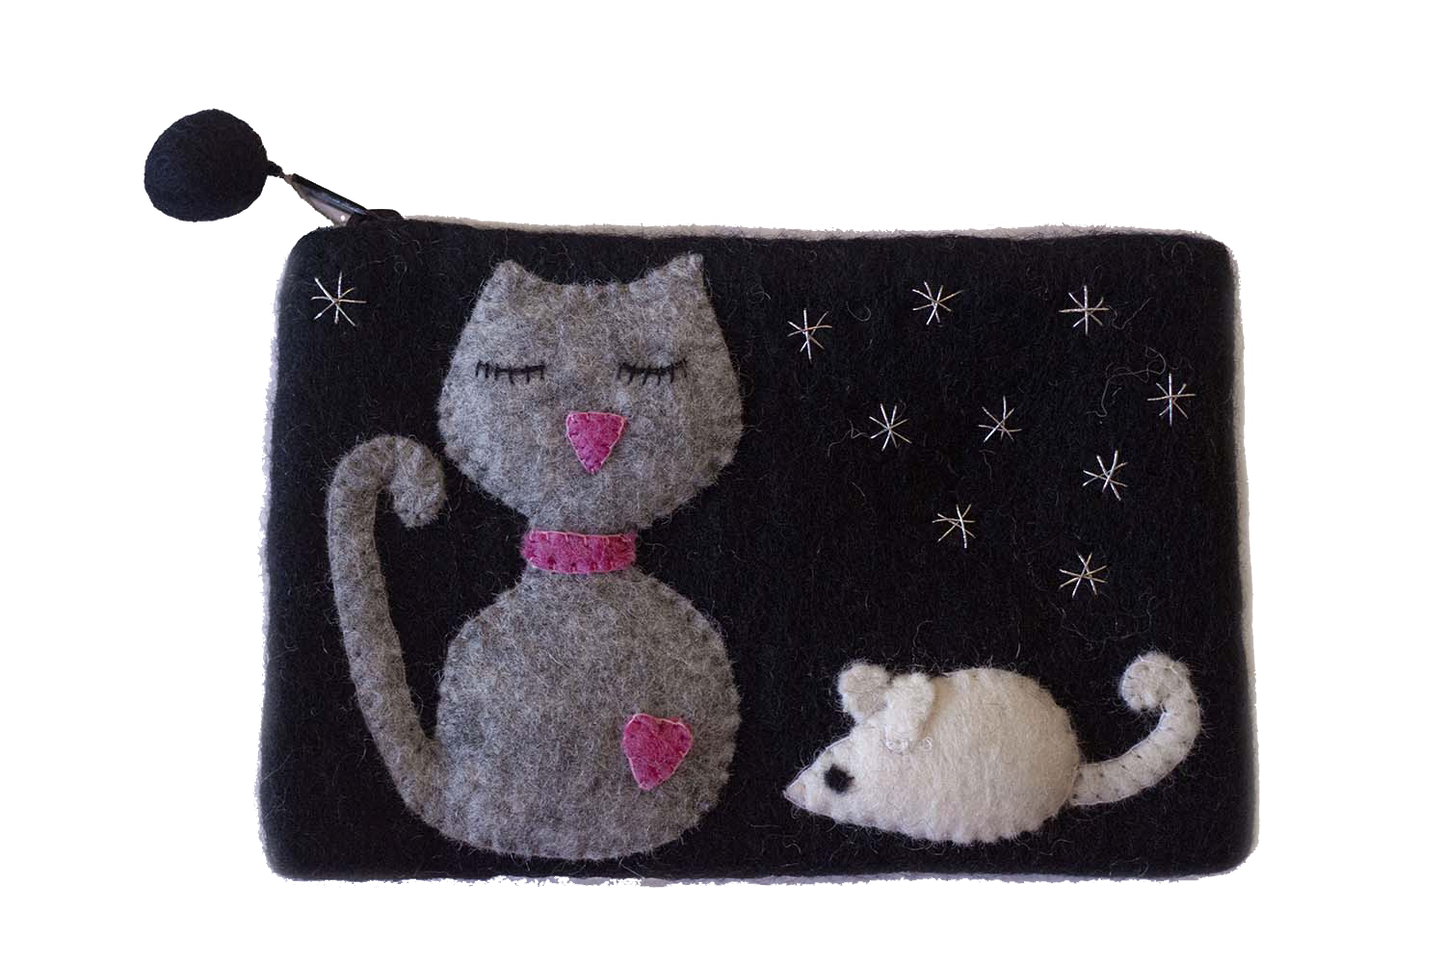 This Global Groove Life, handmade, ethical, fair trade, eco-friendly, sustainable, black felt zipper coin pouch was created by artisans in Kathmandu Nepal and is adorned with an adorable kitty with pink heart and mouse  motif.